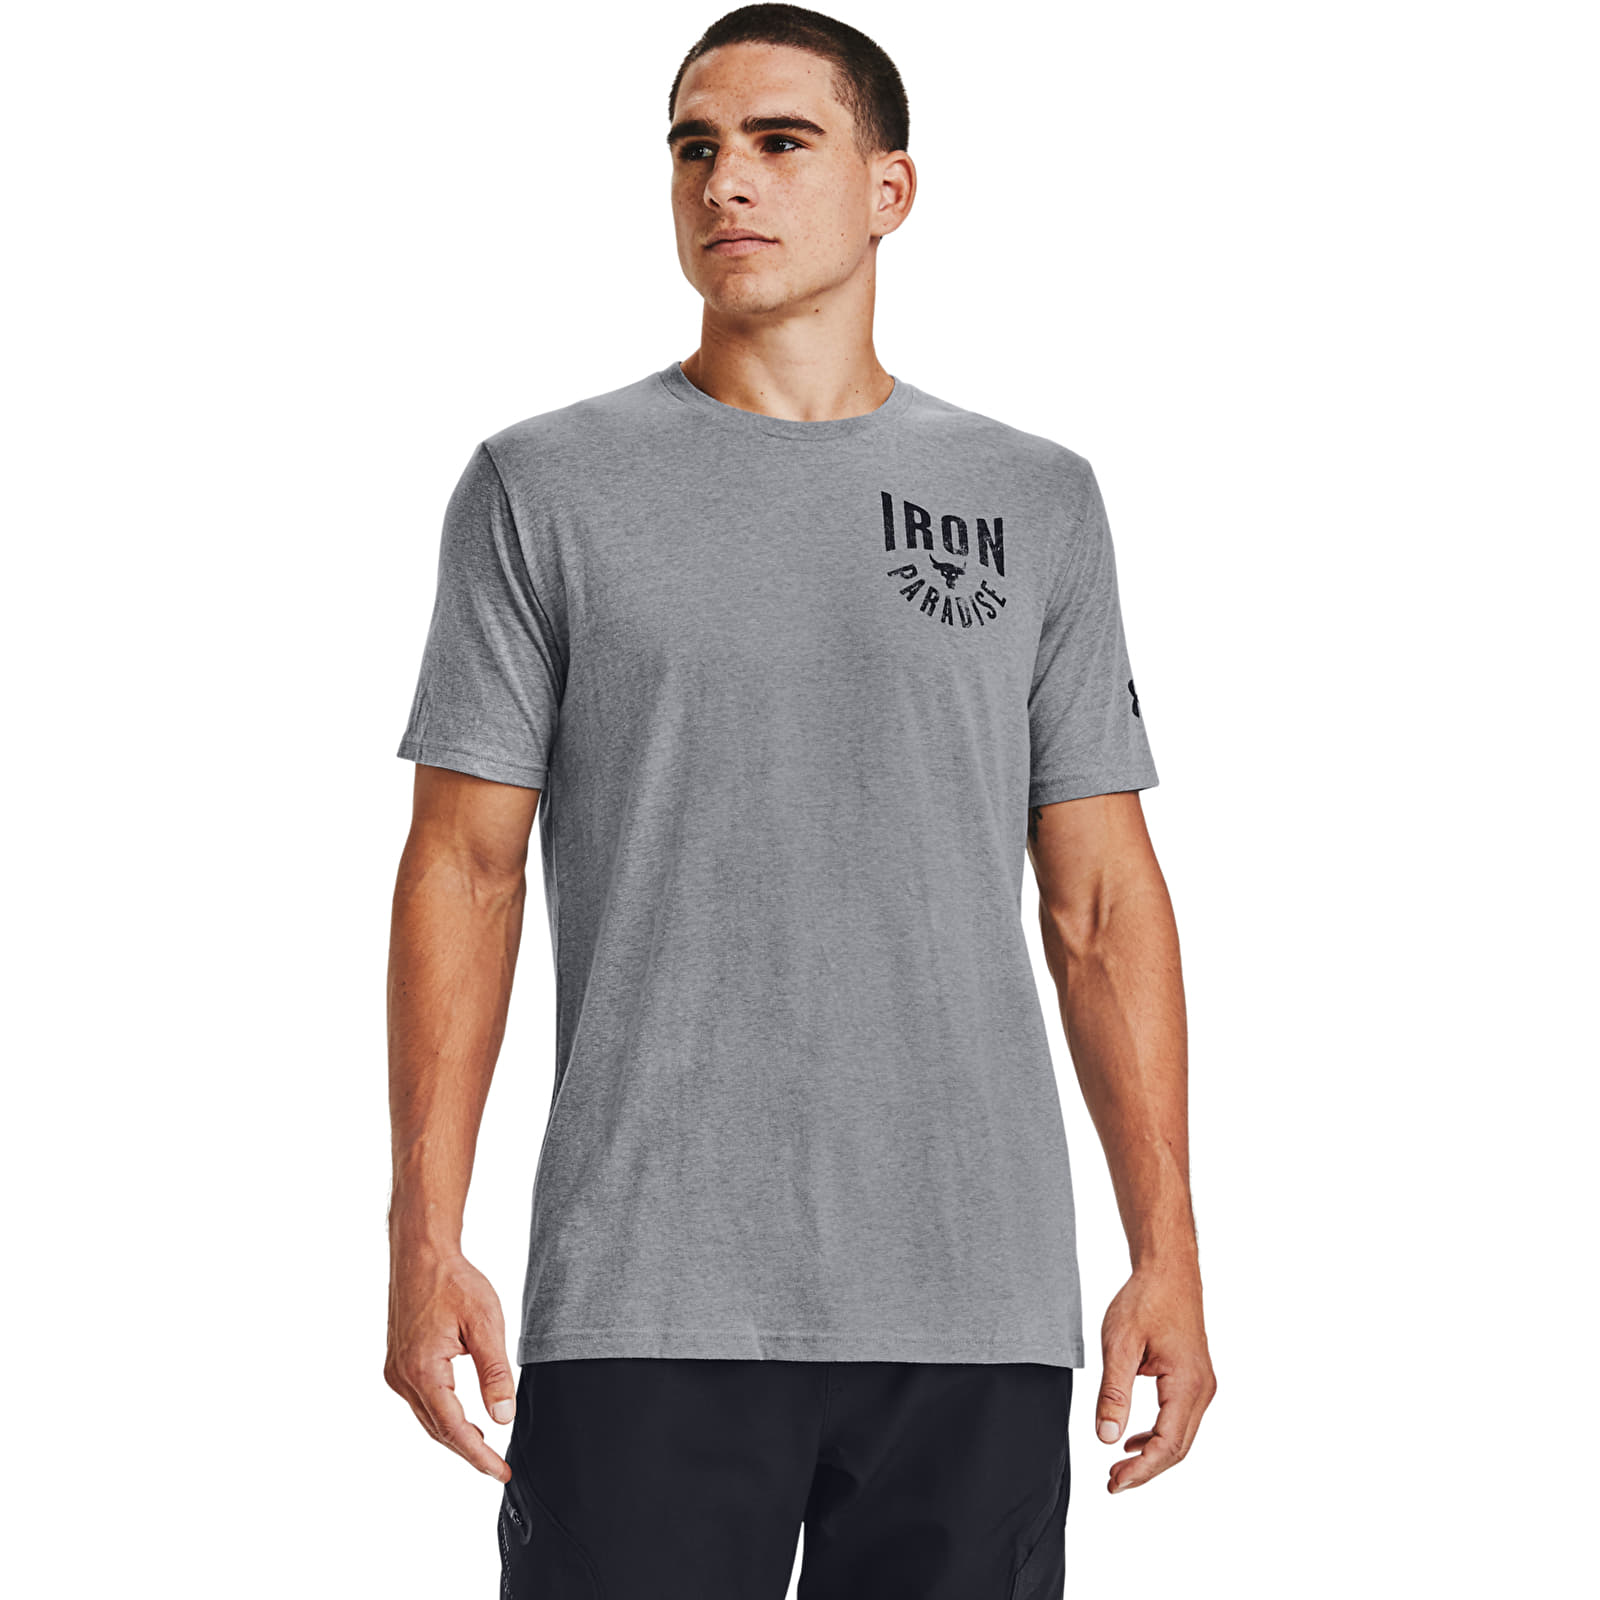 T-shirts Under Armour Project RockIron Paradise Ss Grey